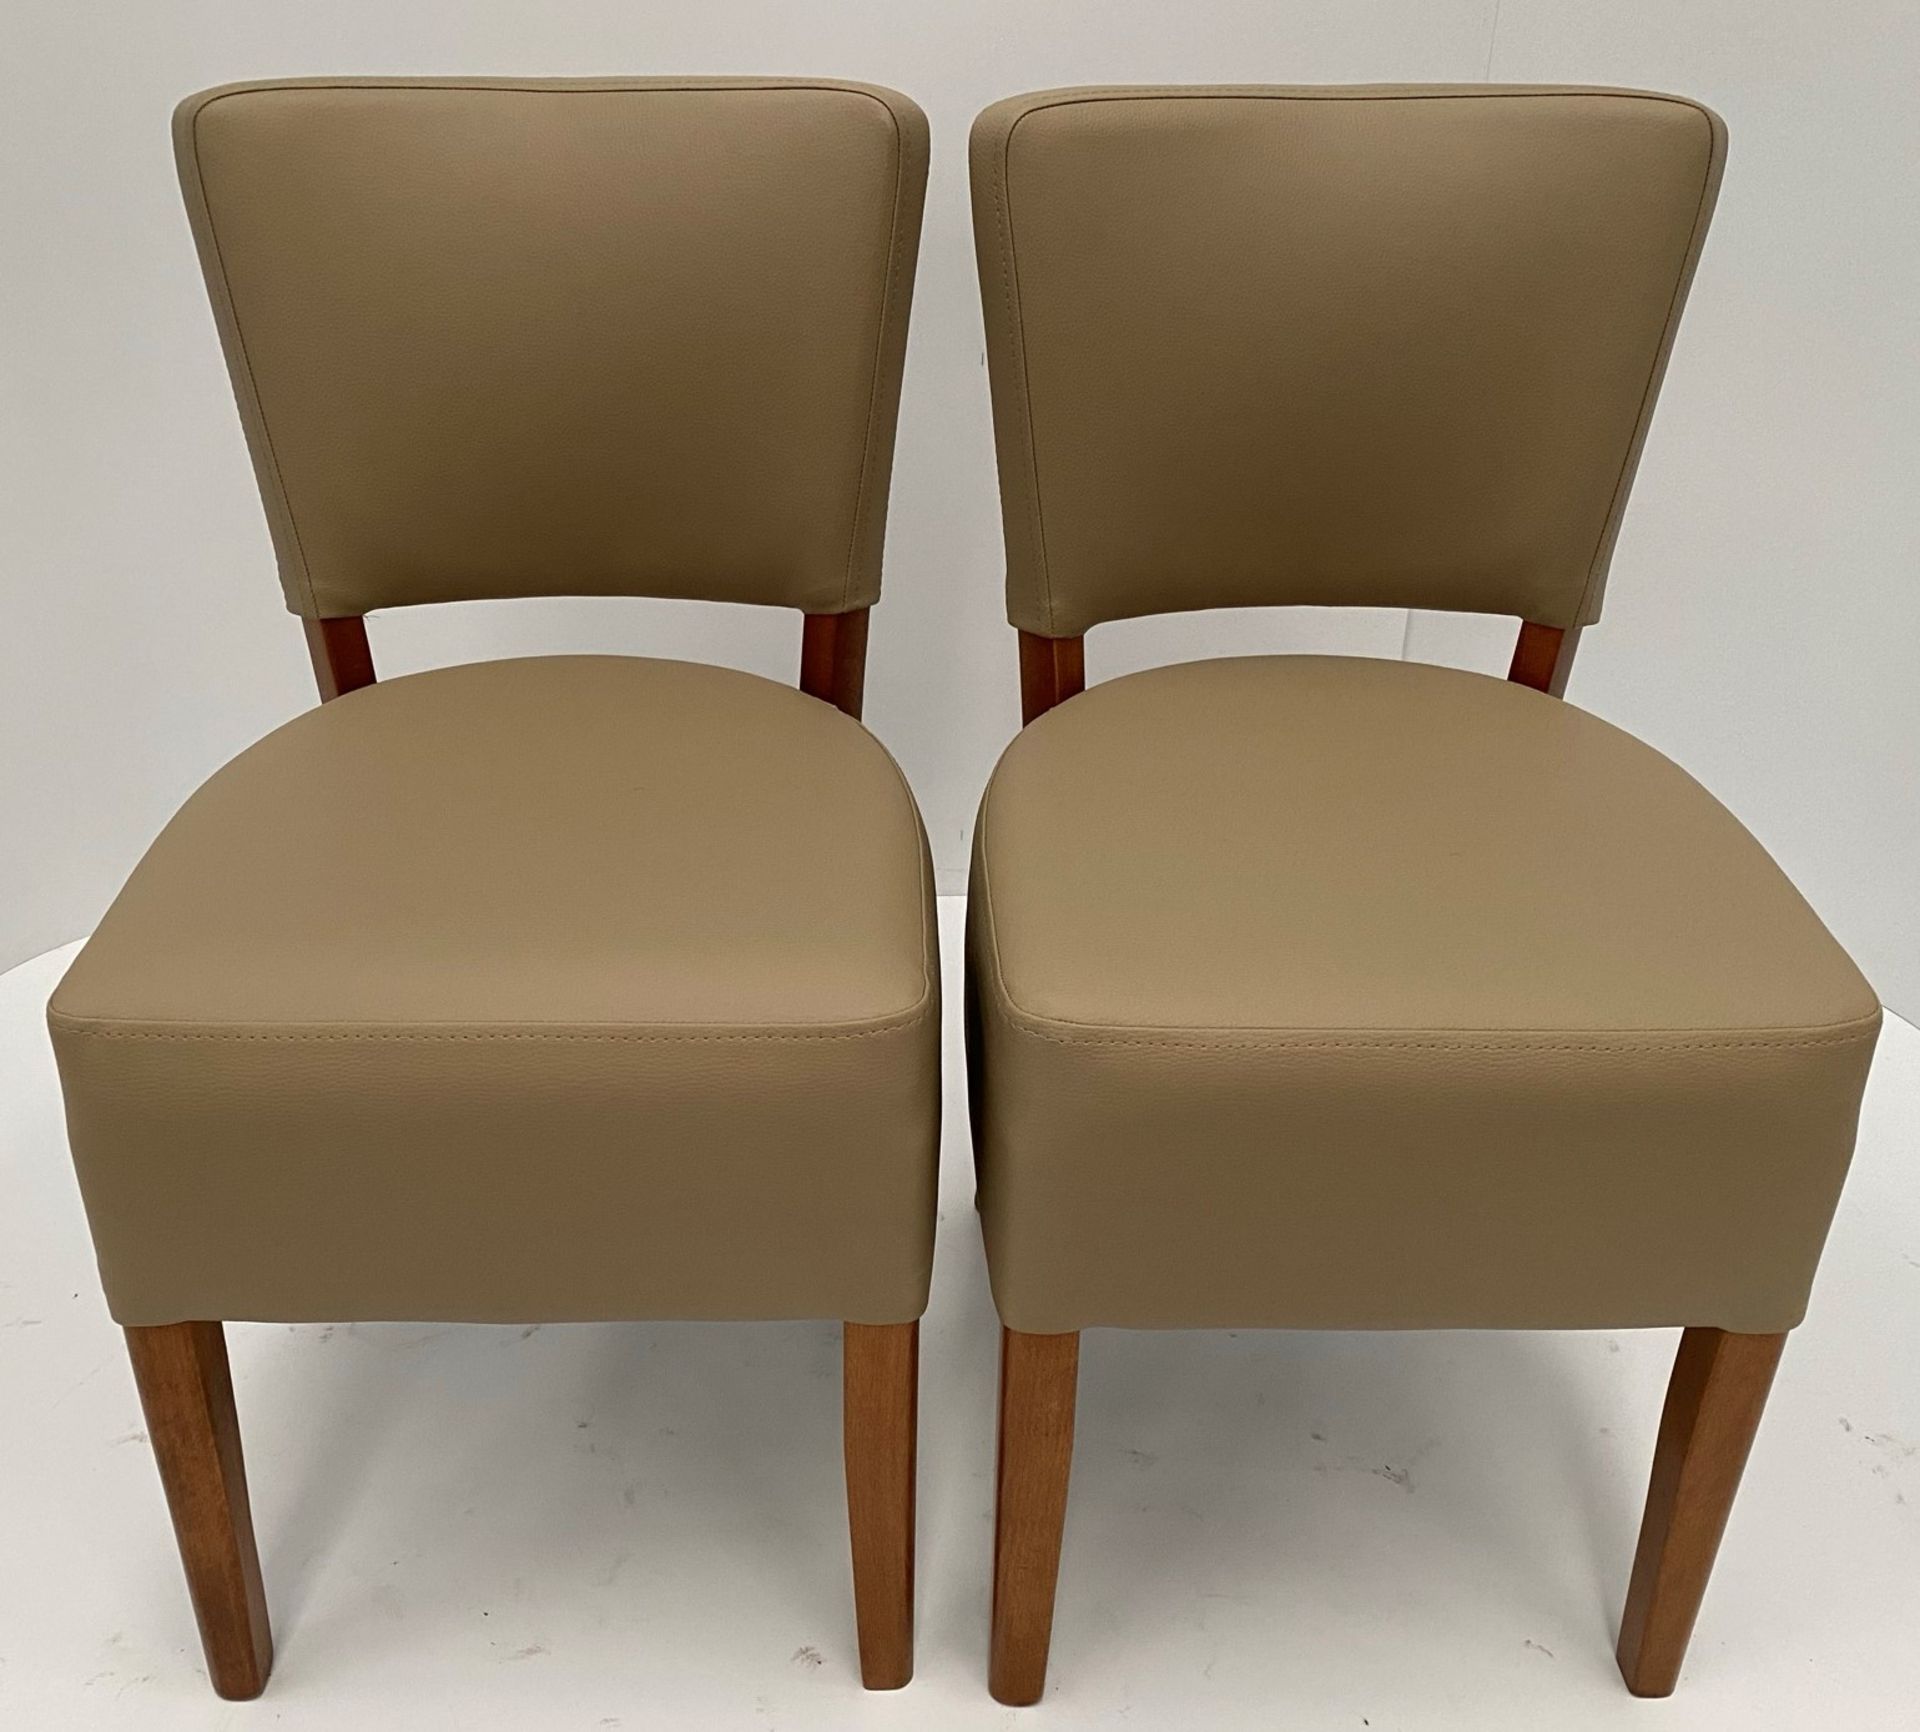 2 x Oregon Dollaro BE-9 + Interliner Crib 5 side/dining chairs with dark oak coloured frames